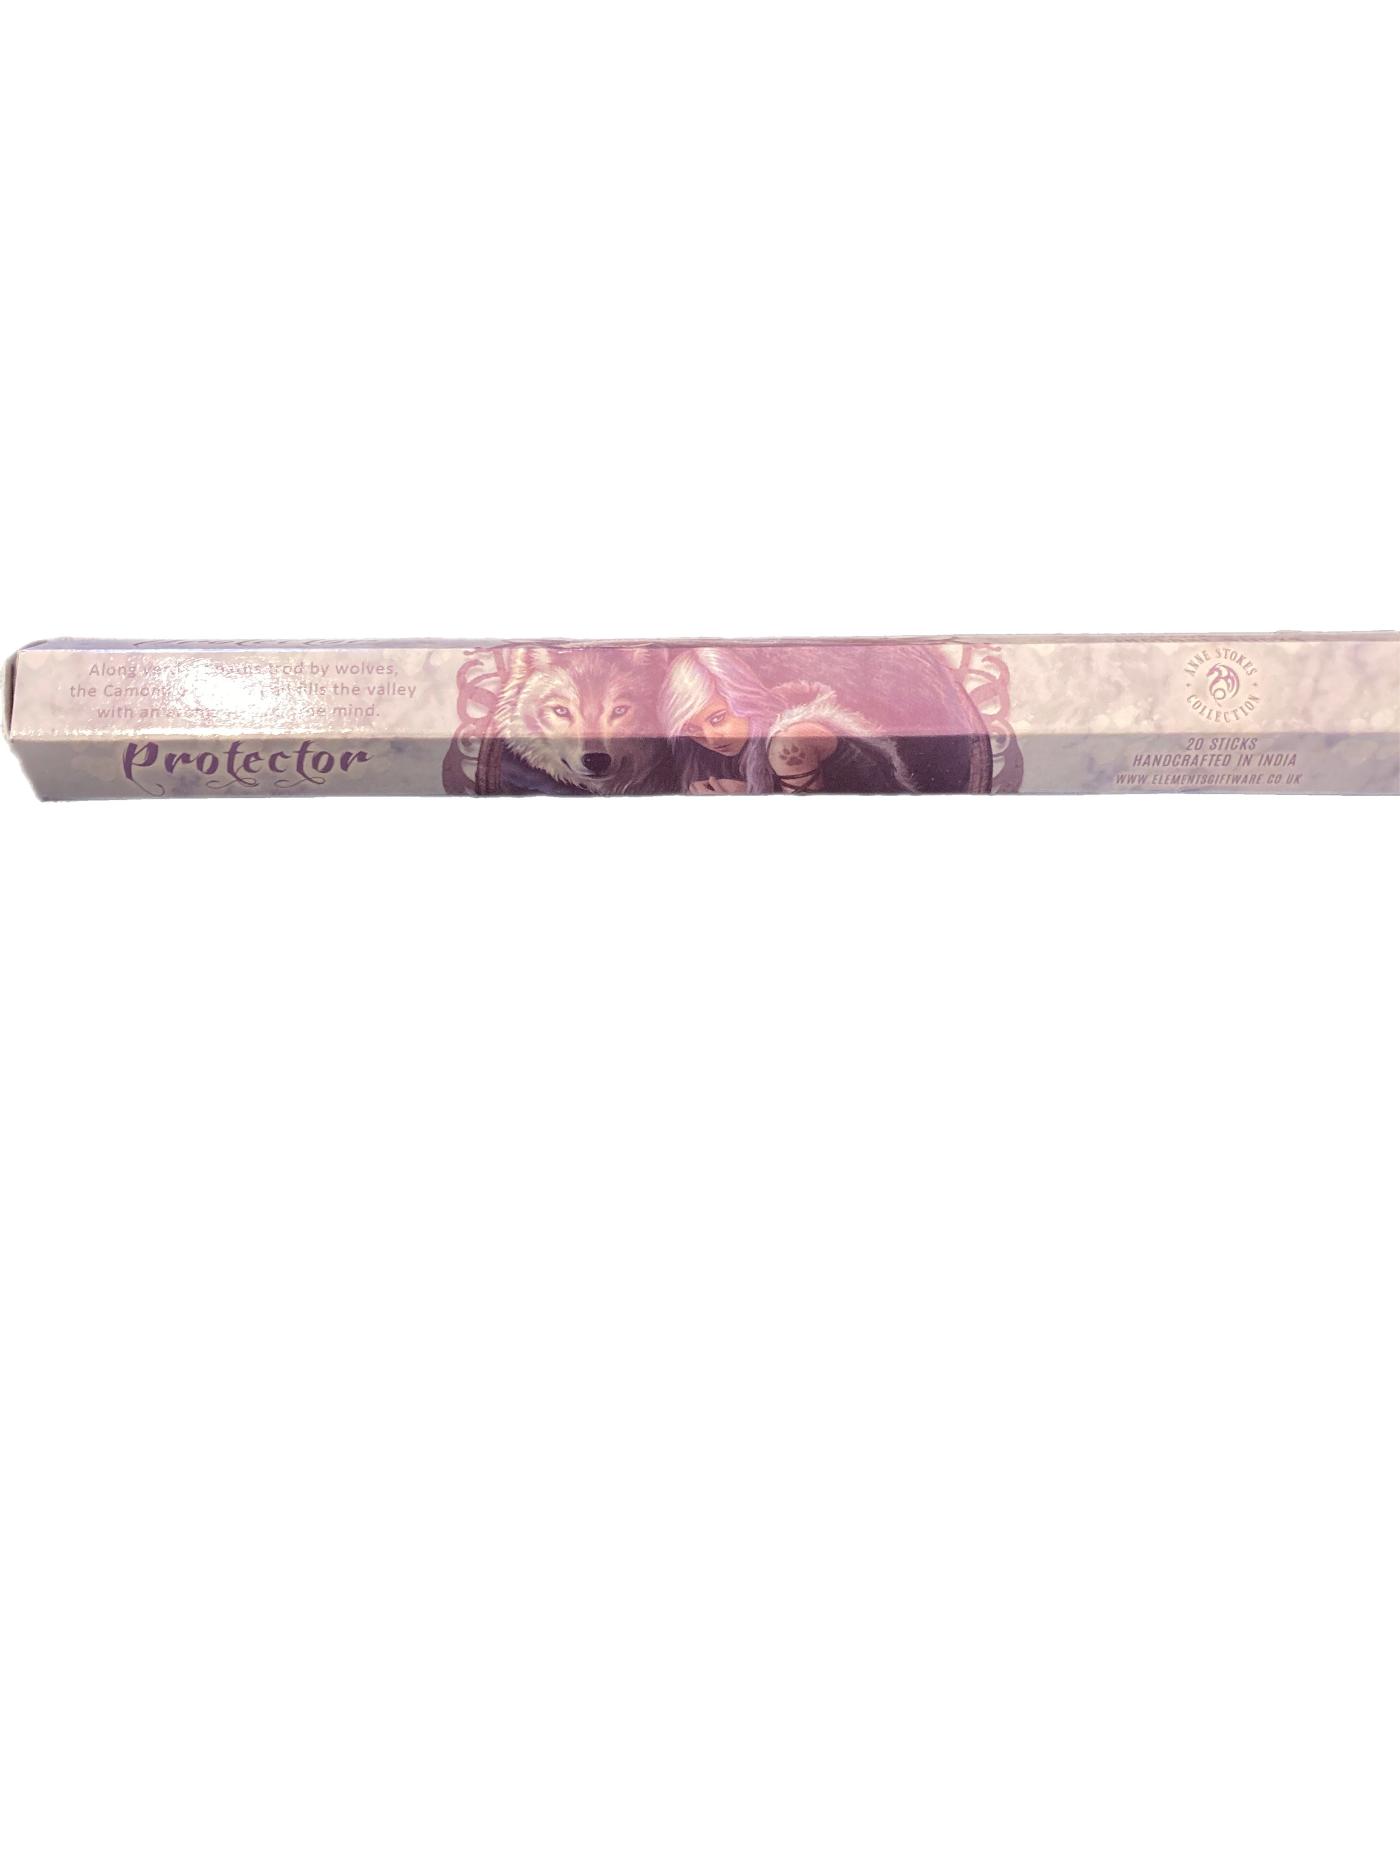 Anne Stokes incense sticks protector